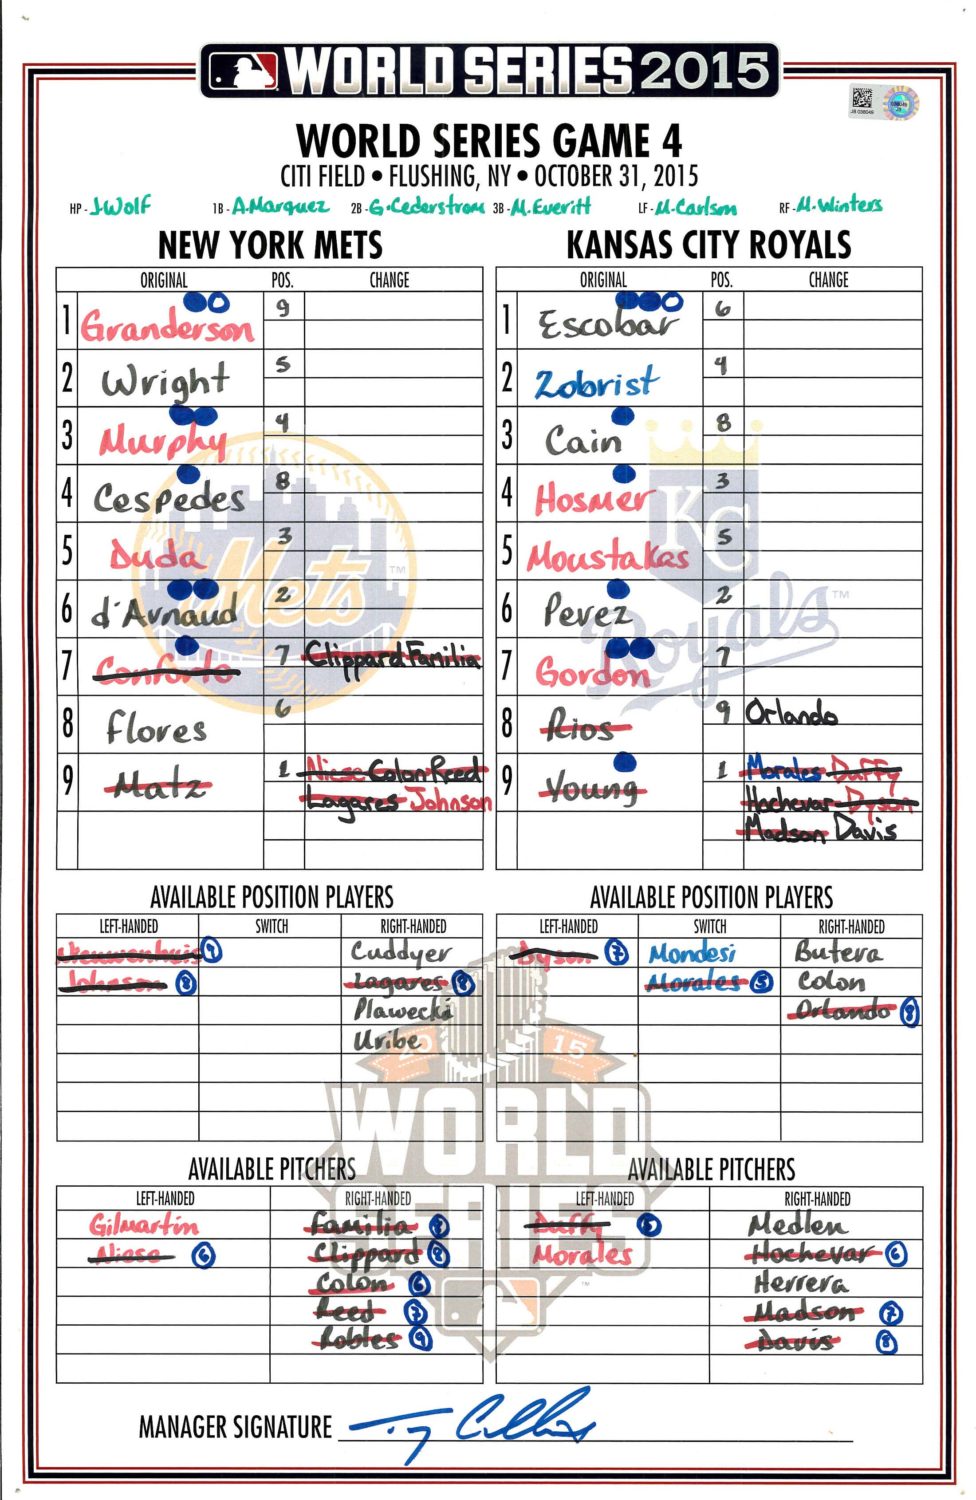 Lineup Card: Conforto's 2-HR World Series Game